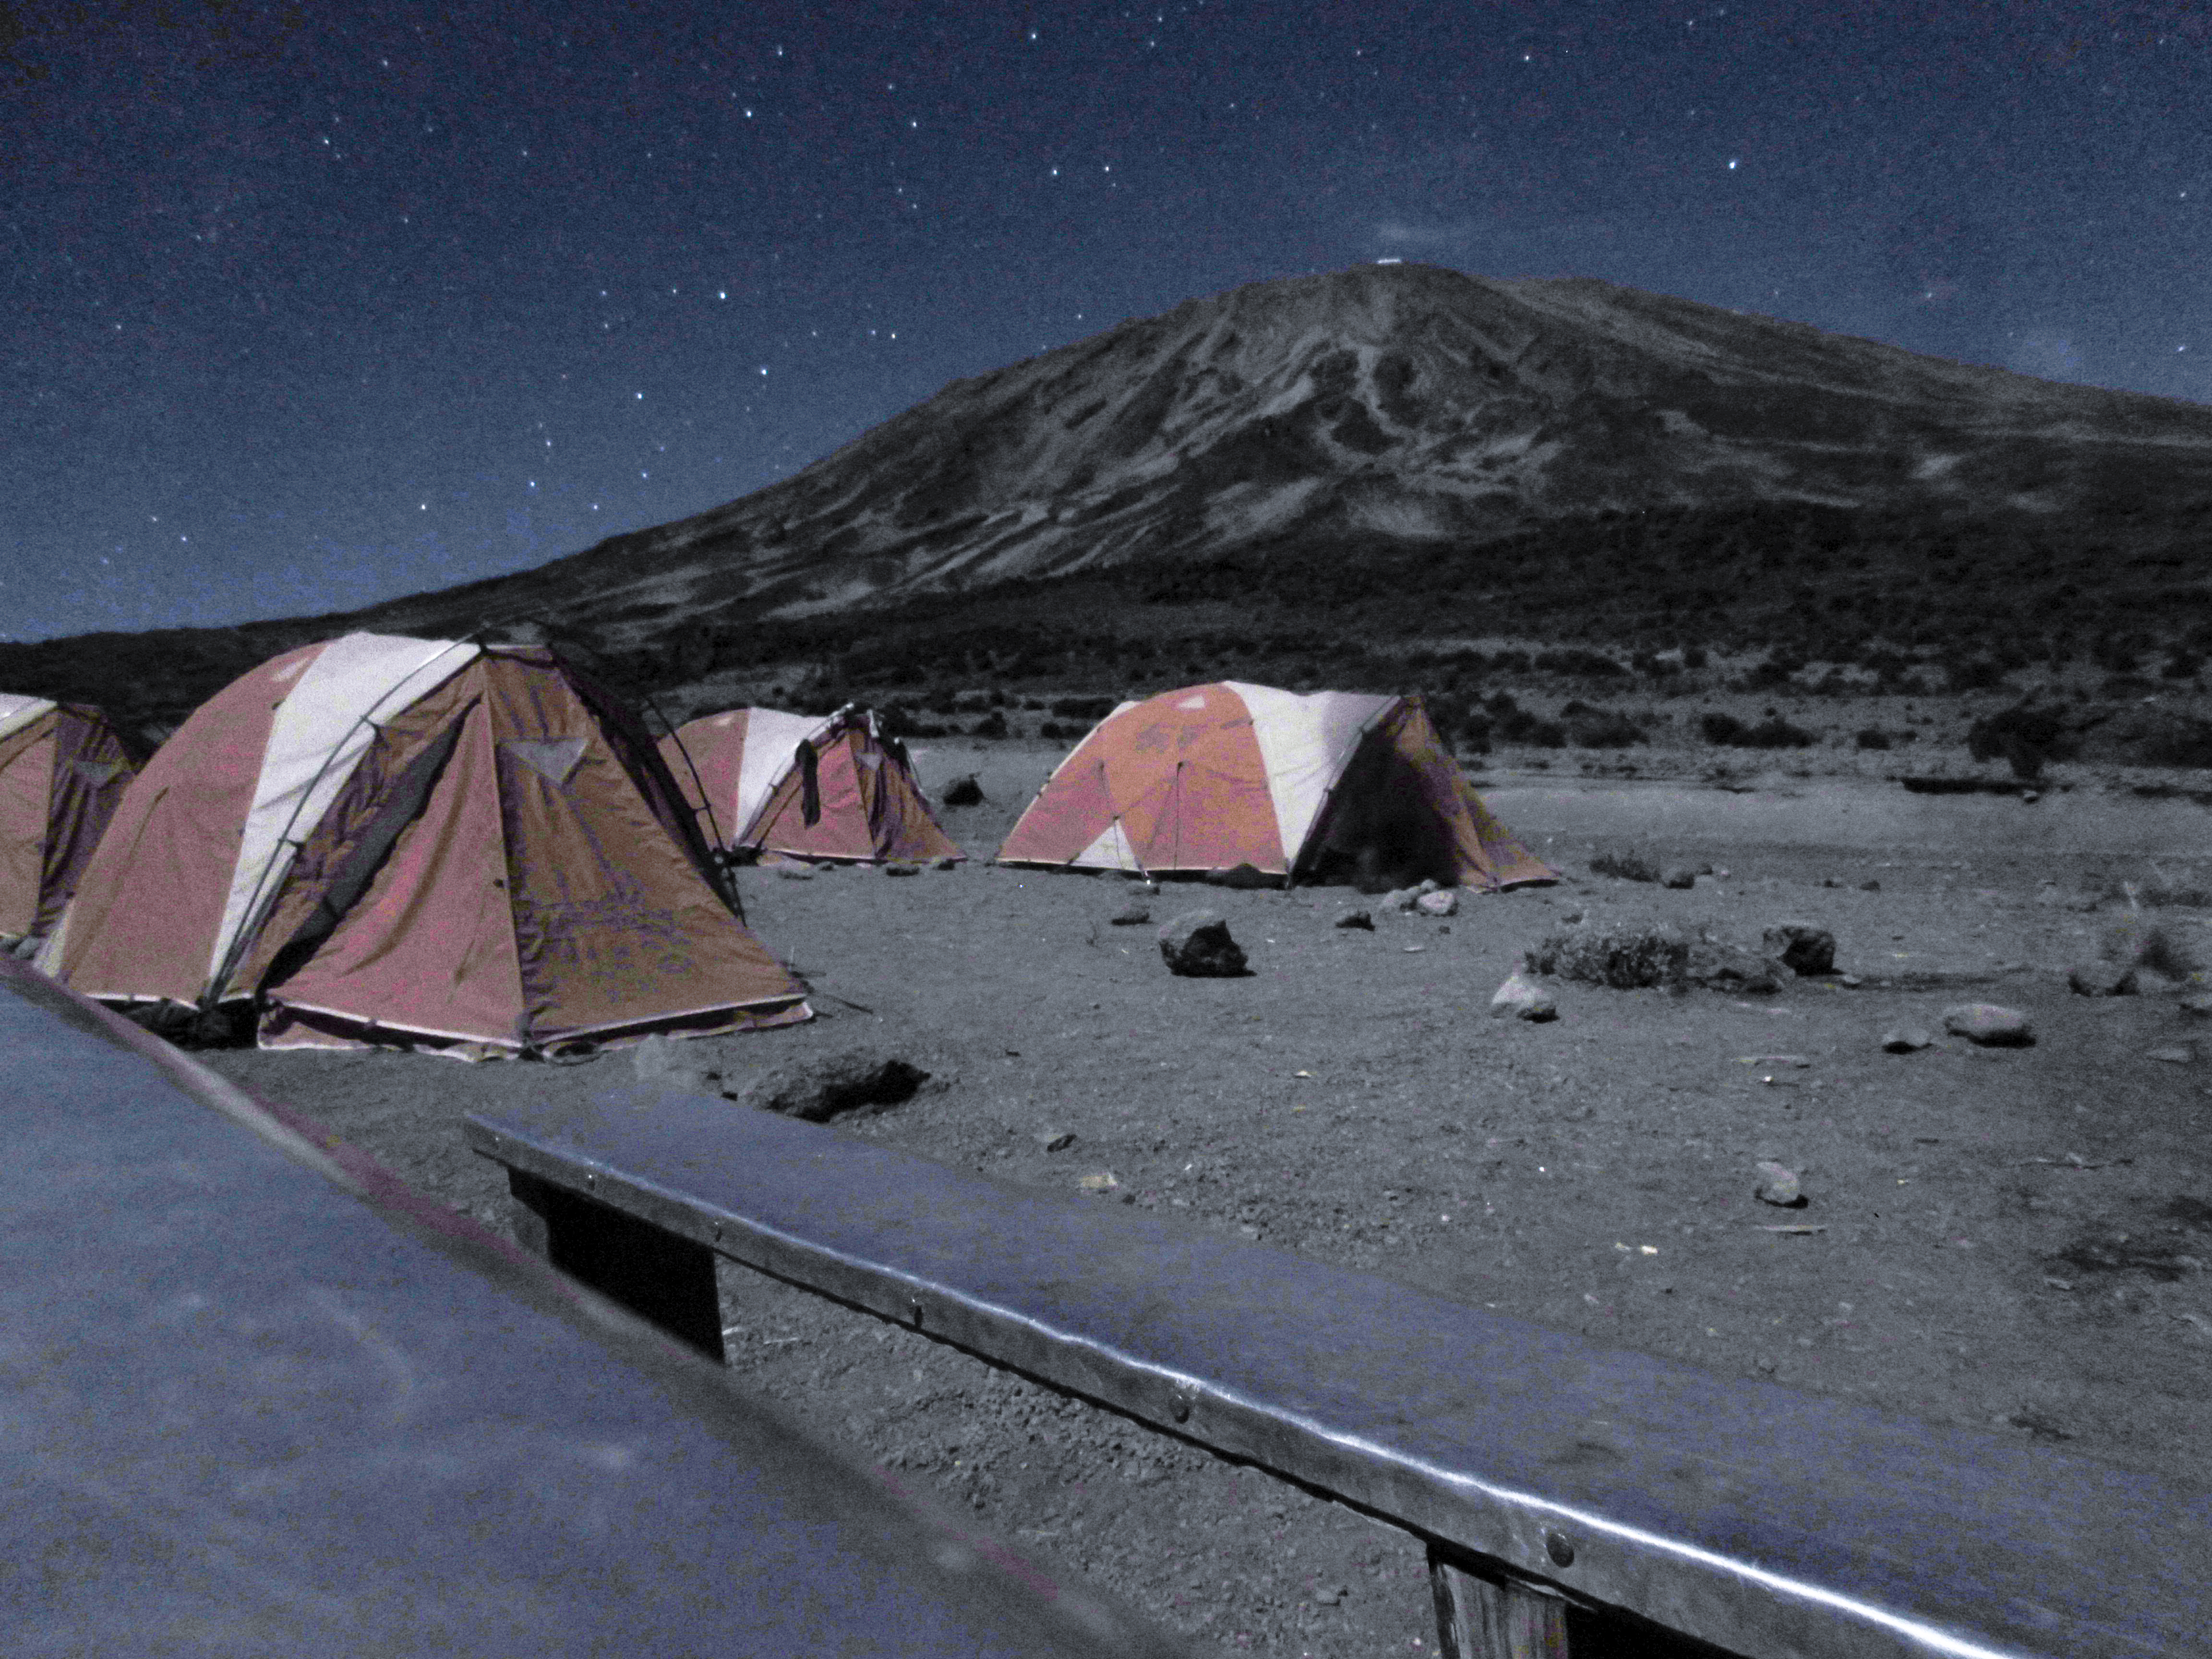 Kibo night view from 3rd Cave camp with ghost - photo by Giovanni Baffa Scinelli